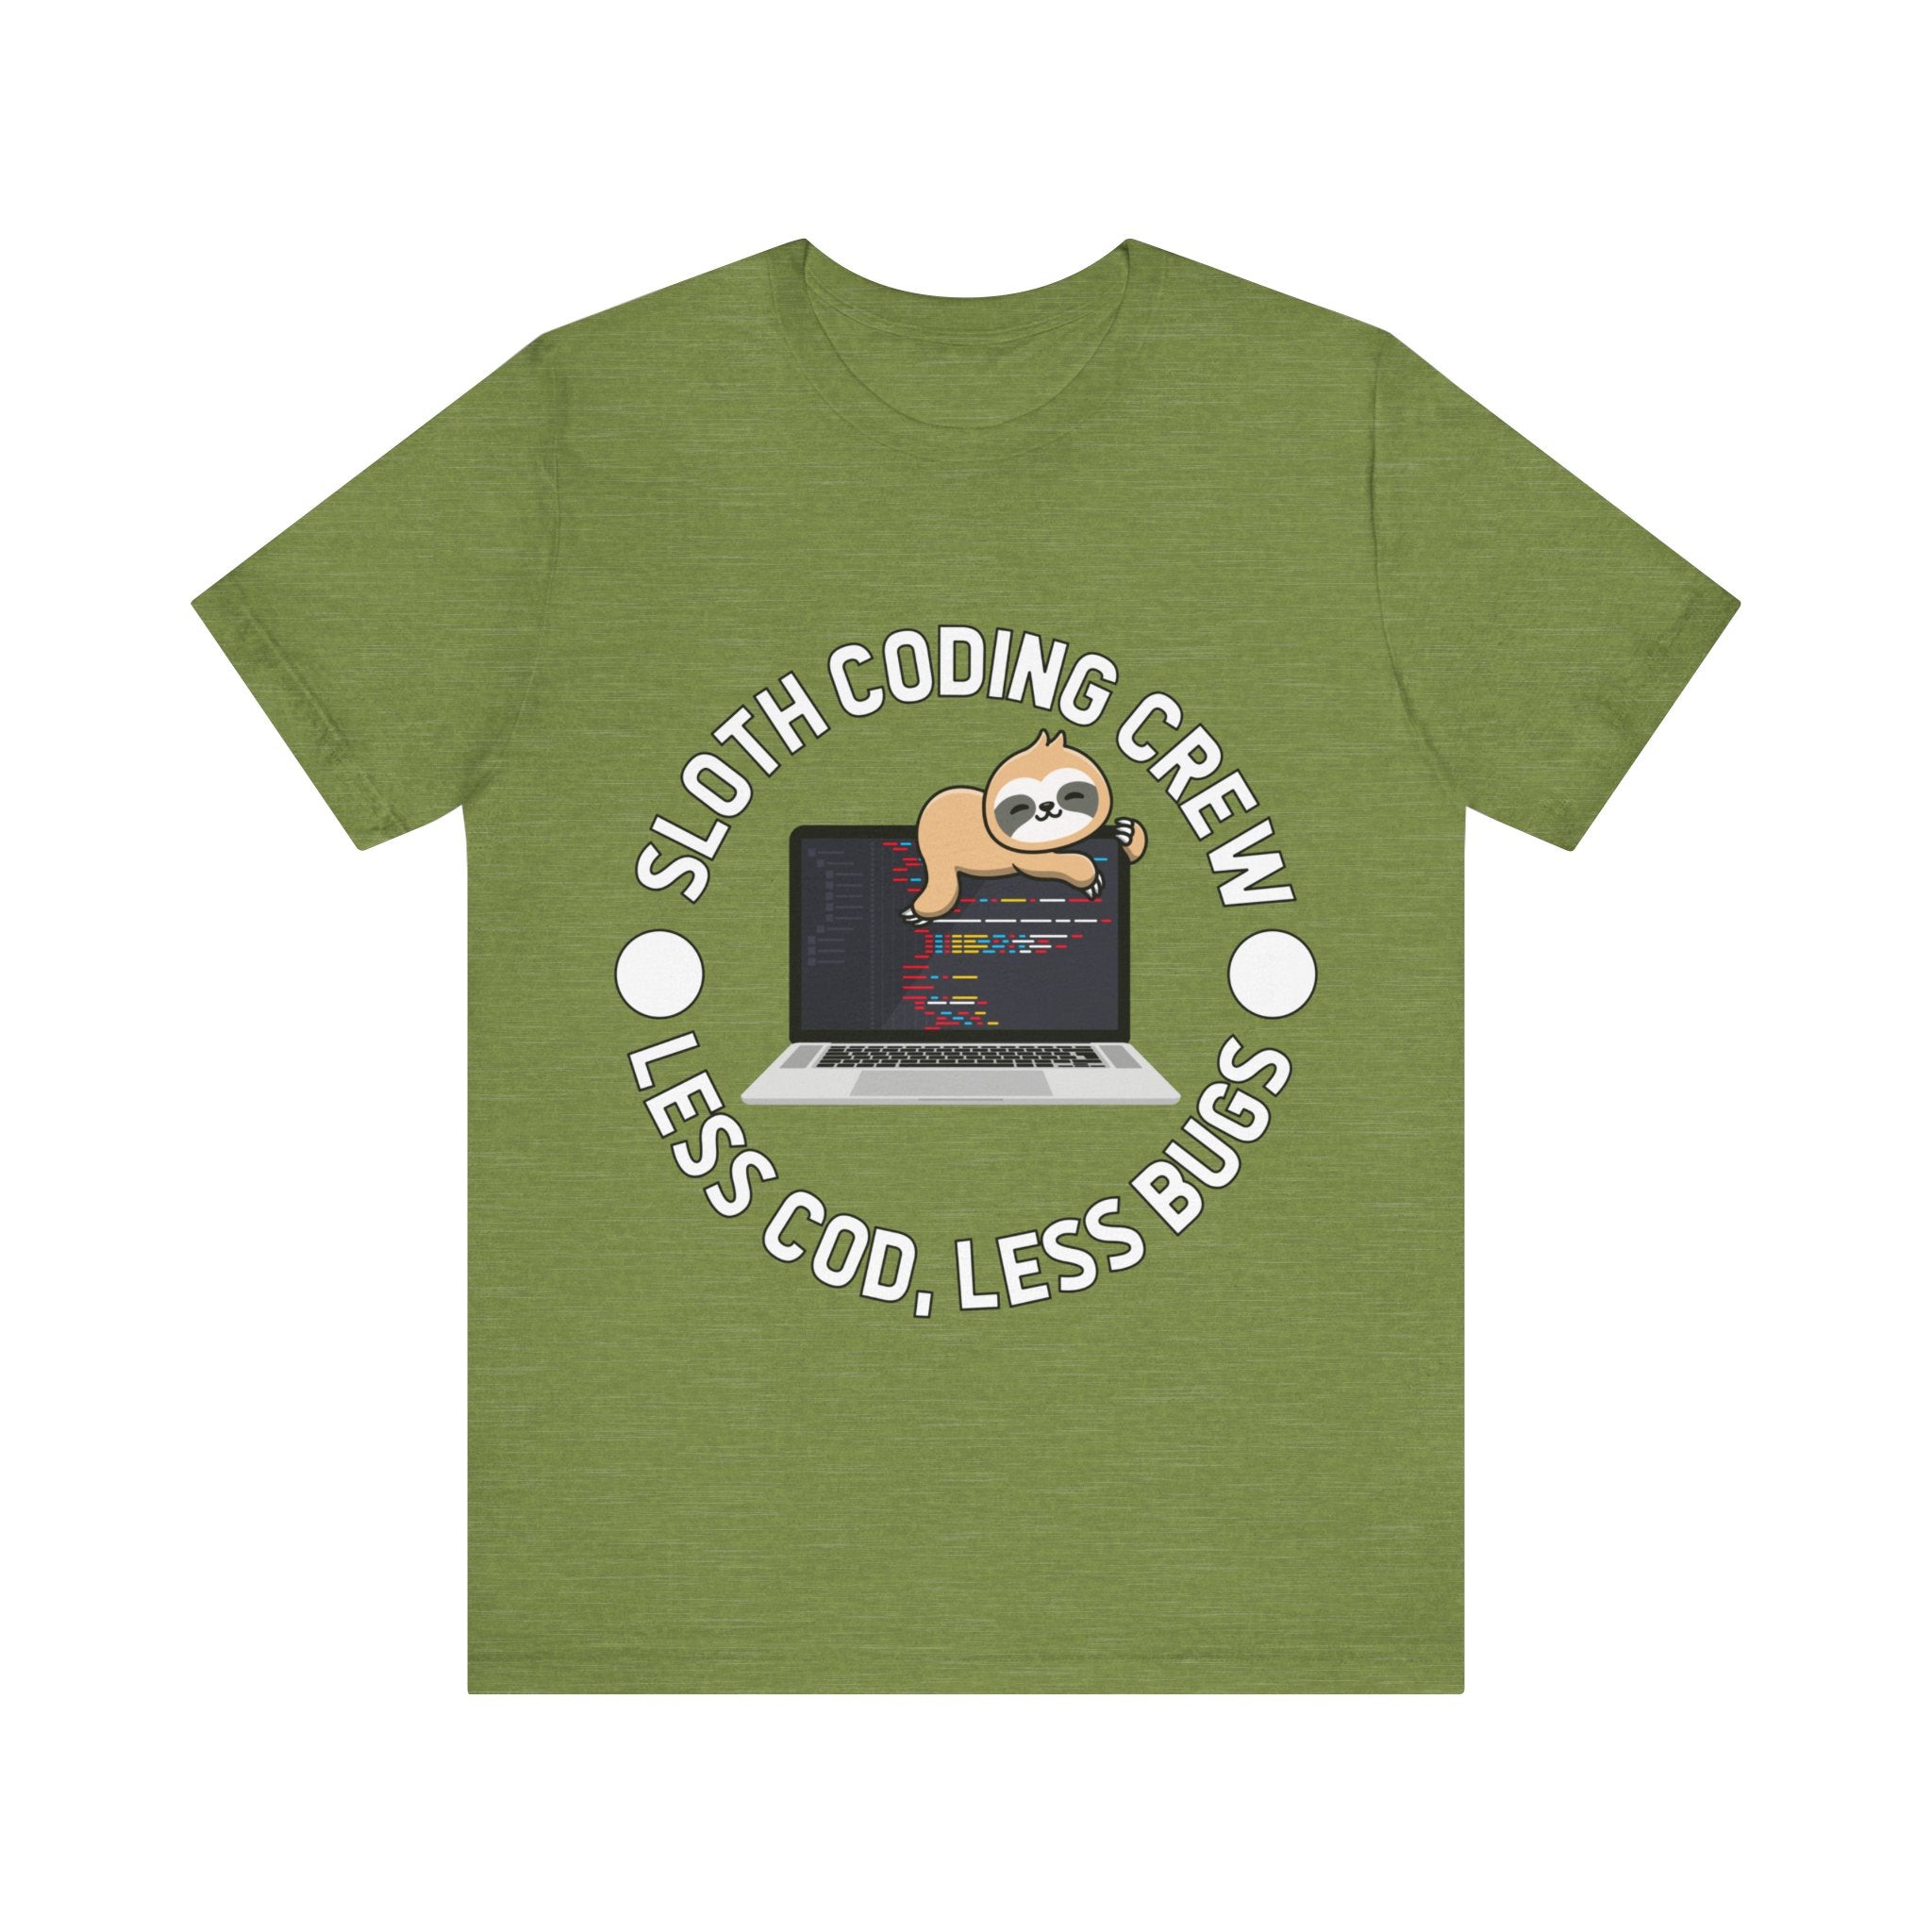 Green unisex jersey tee featuring a cartoon sloth on a laptop with the text "Sloth Coding Crew Less Cod Less Bugs.